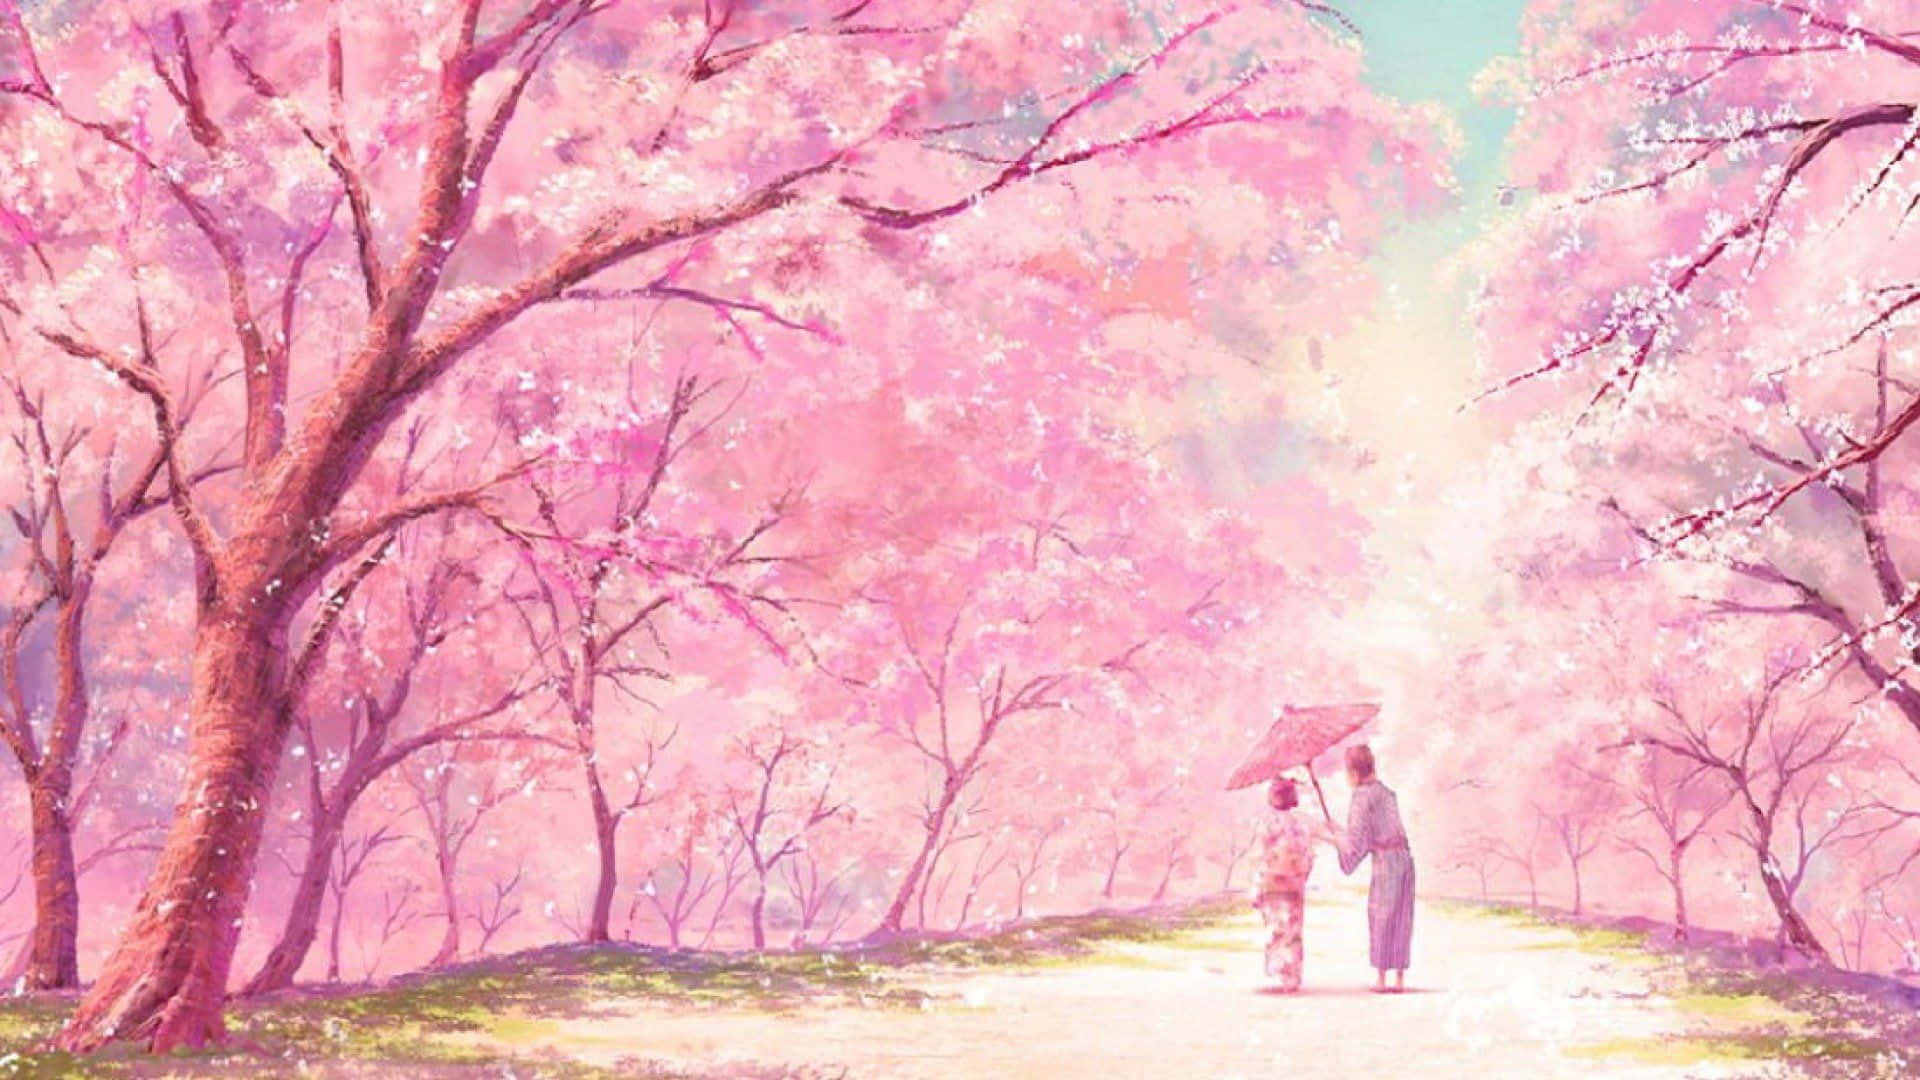 Pastel Aesthetic Anime Path With Cherry Blossom Trees Wallpaper